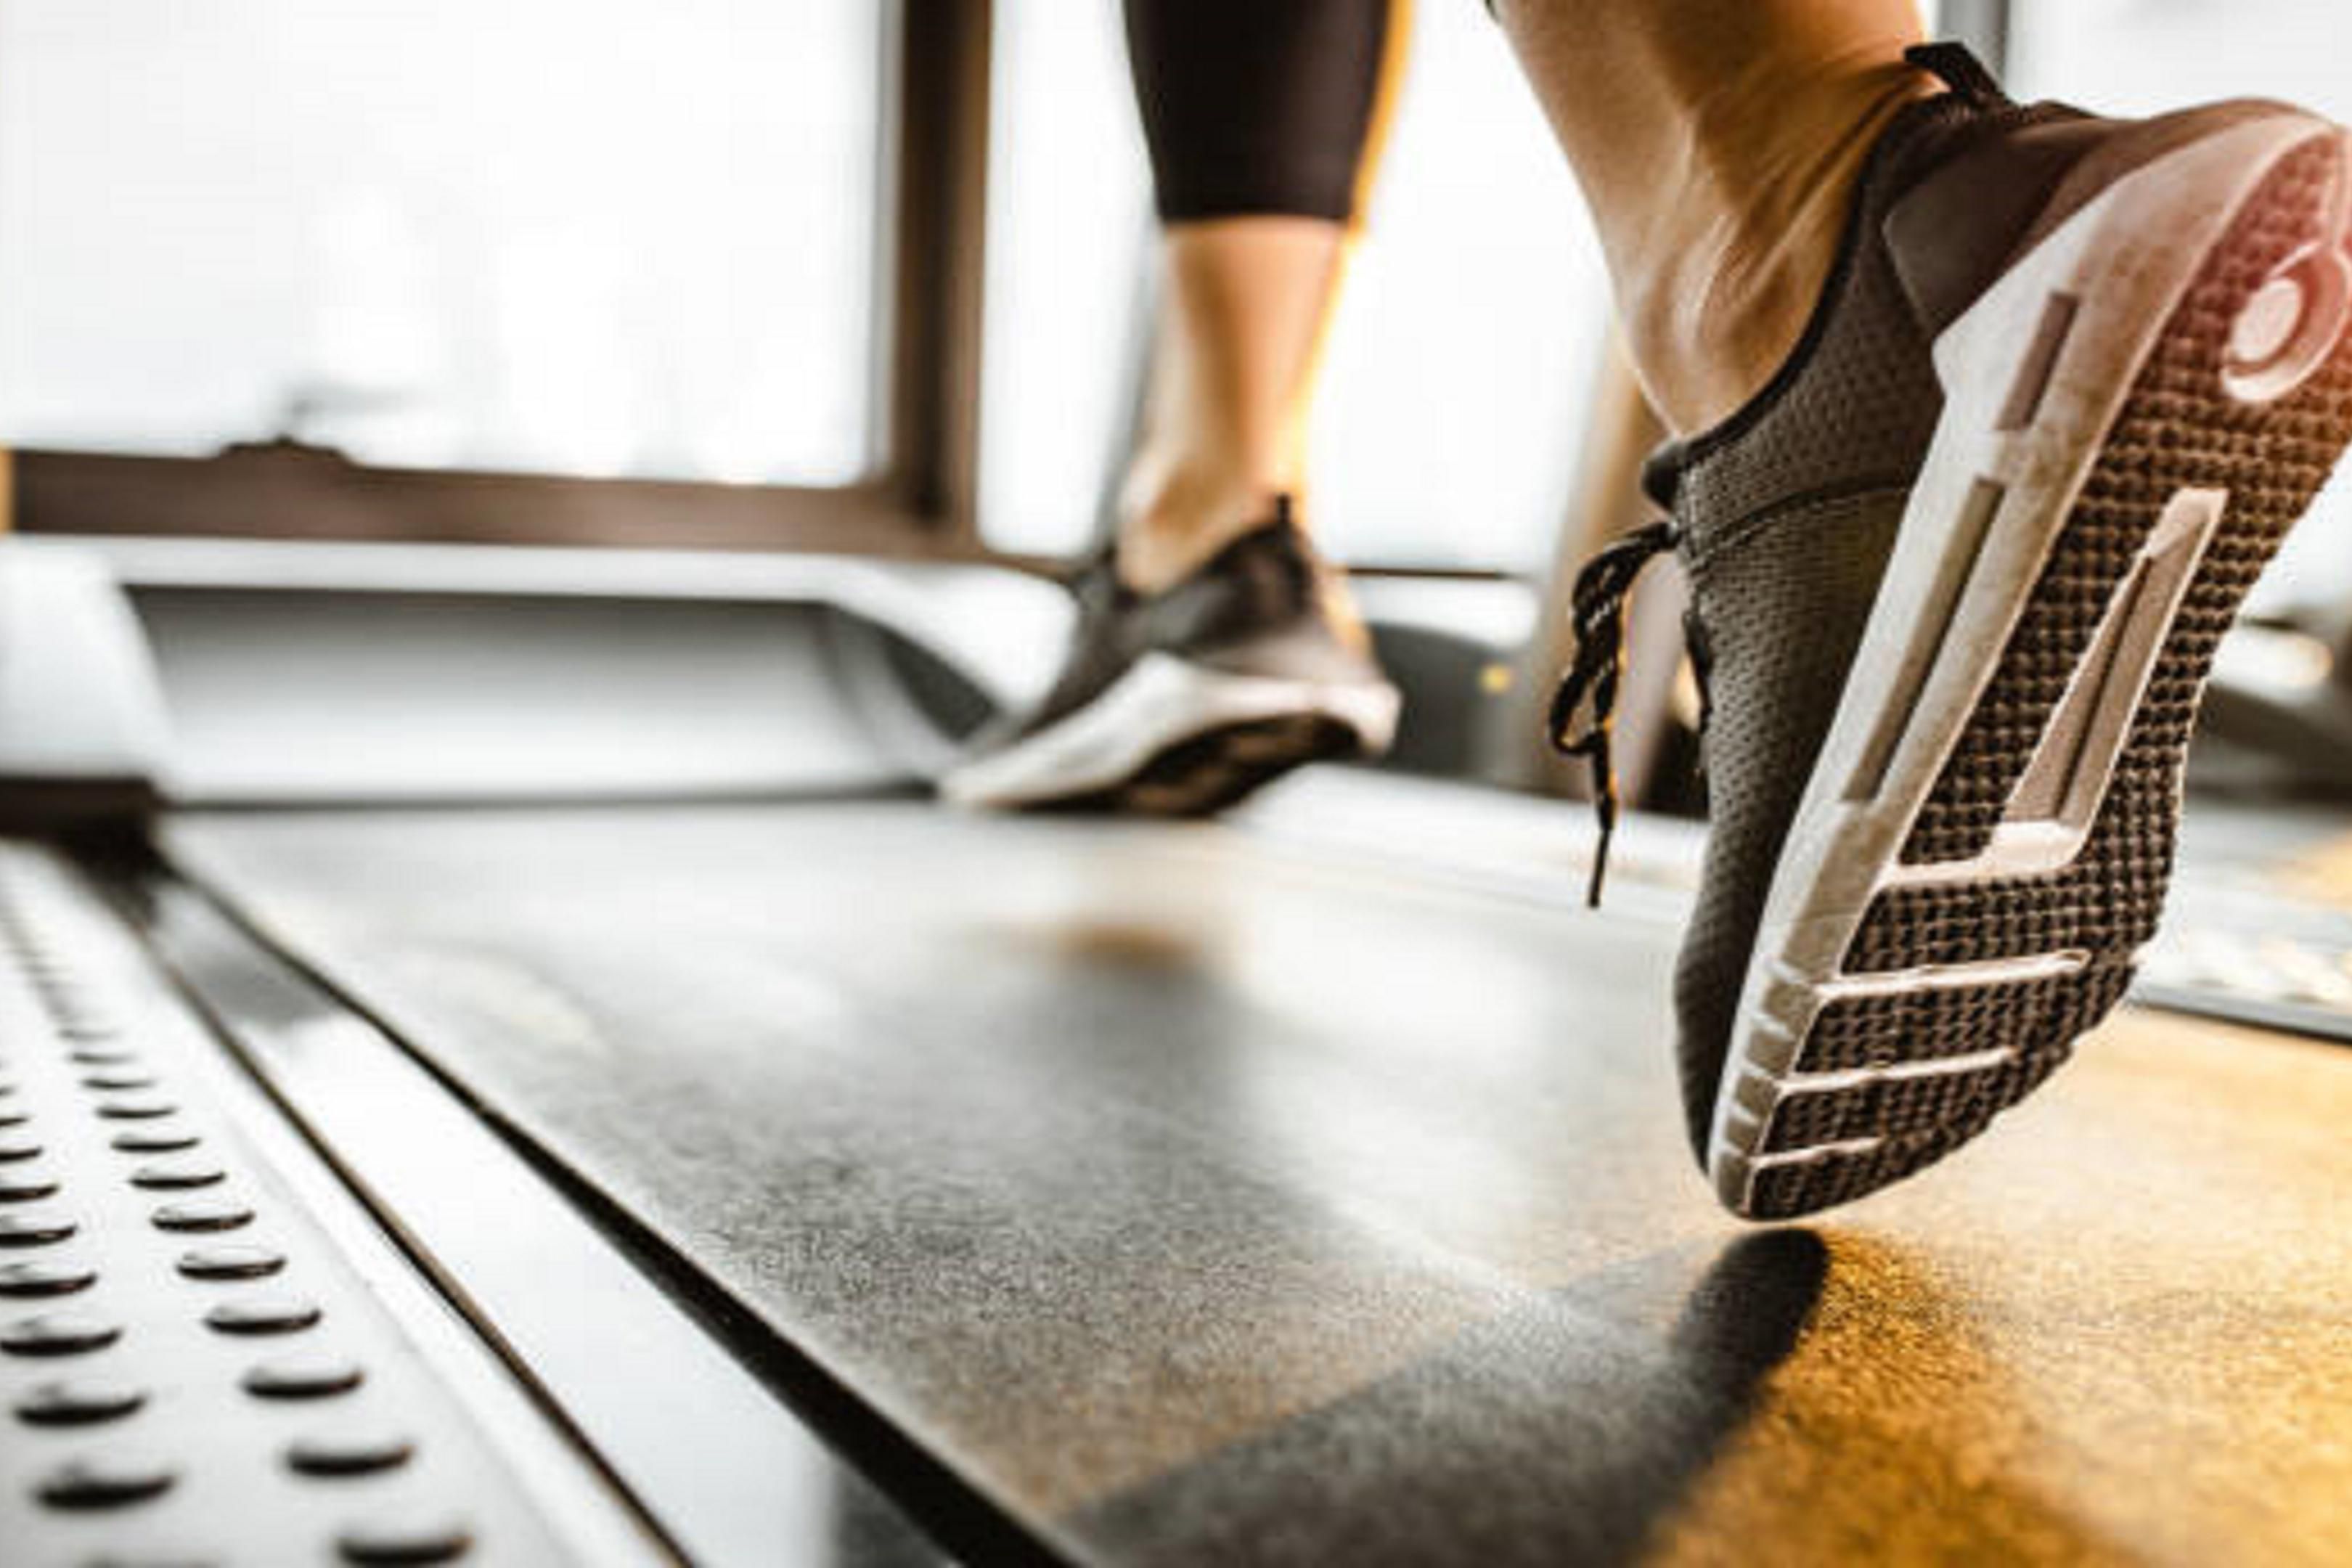 Get your sweat on in our complimentary, 24/7, fully equipped fitness center with treadmills, ellipticals, stationary bikes, and rowing machines, and free weights.